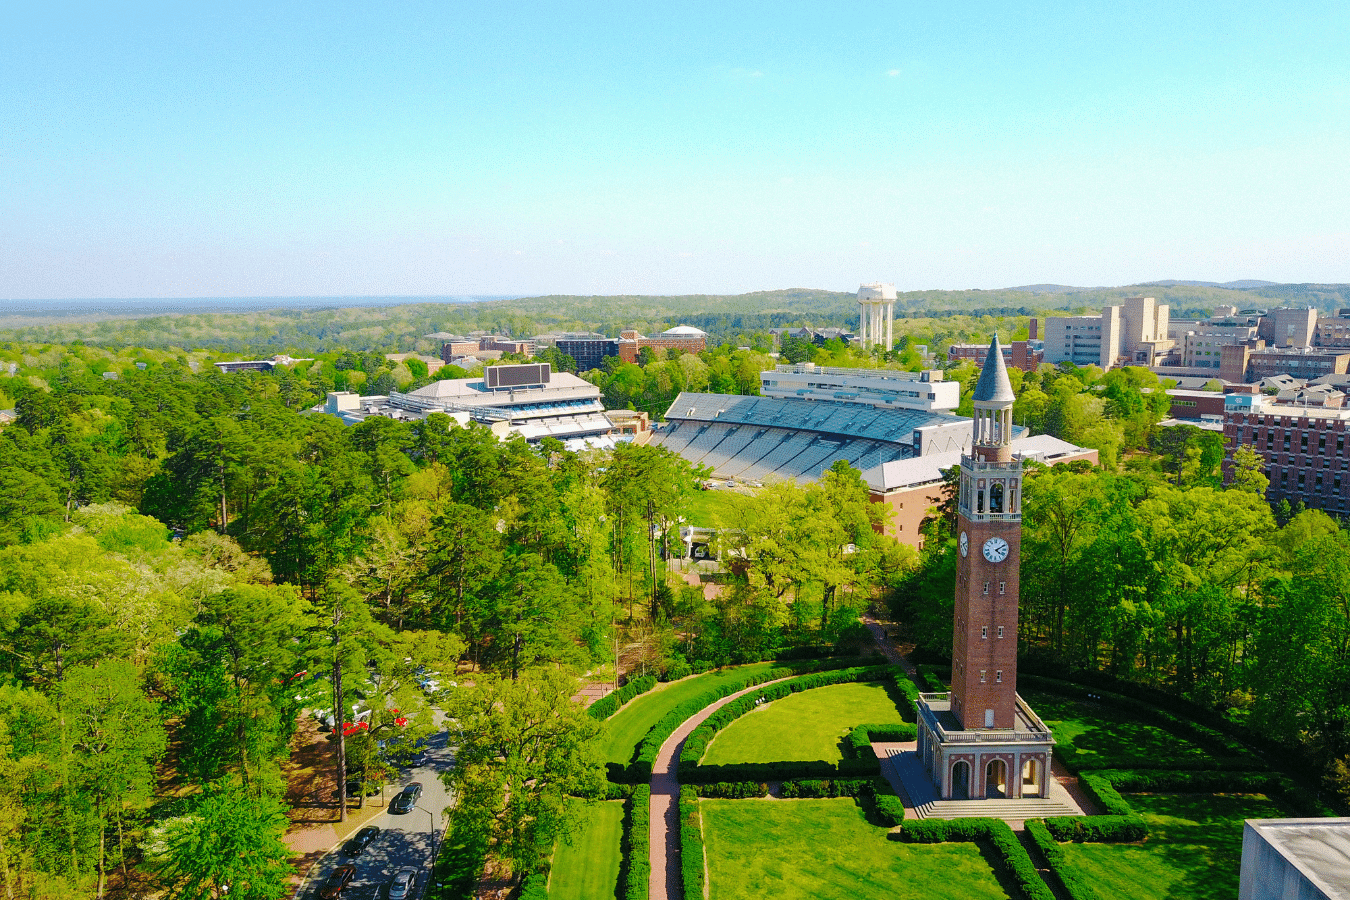 University of North Carolina aerial view of the campus and clock tower on a sunny day in Chapel Hill